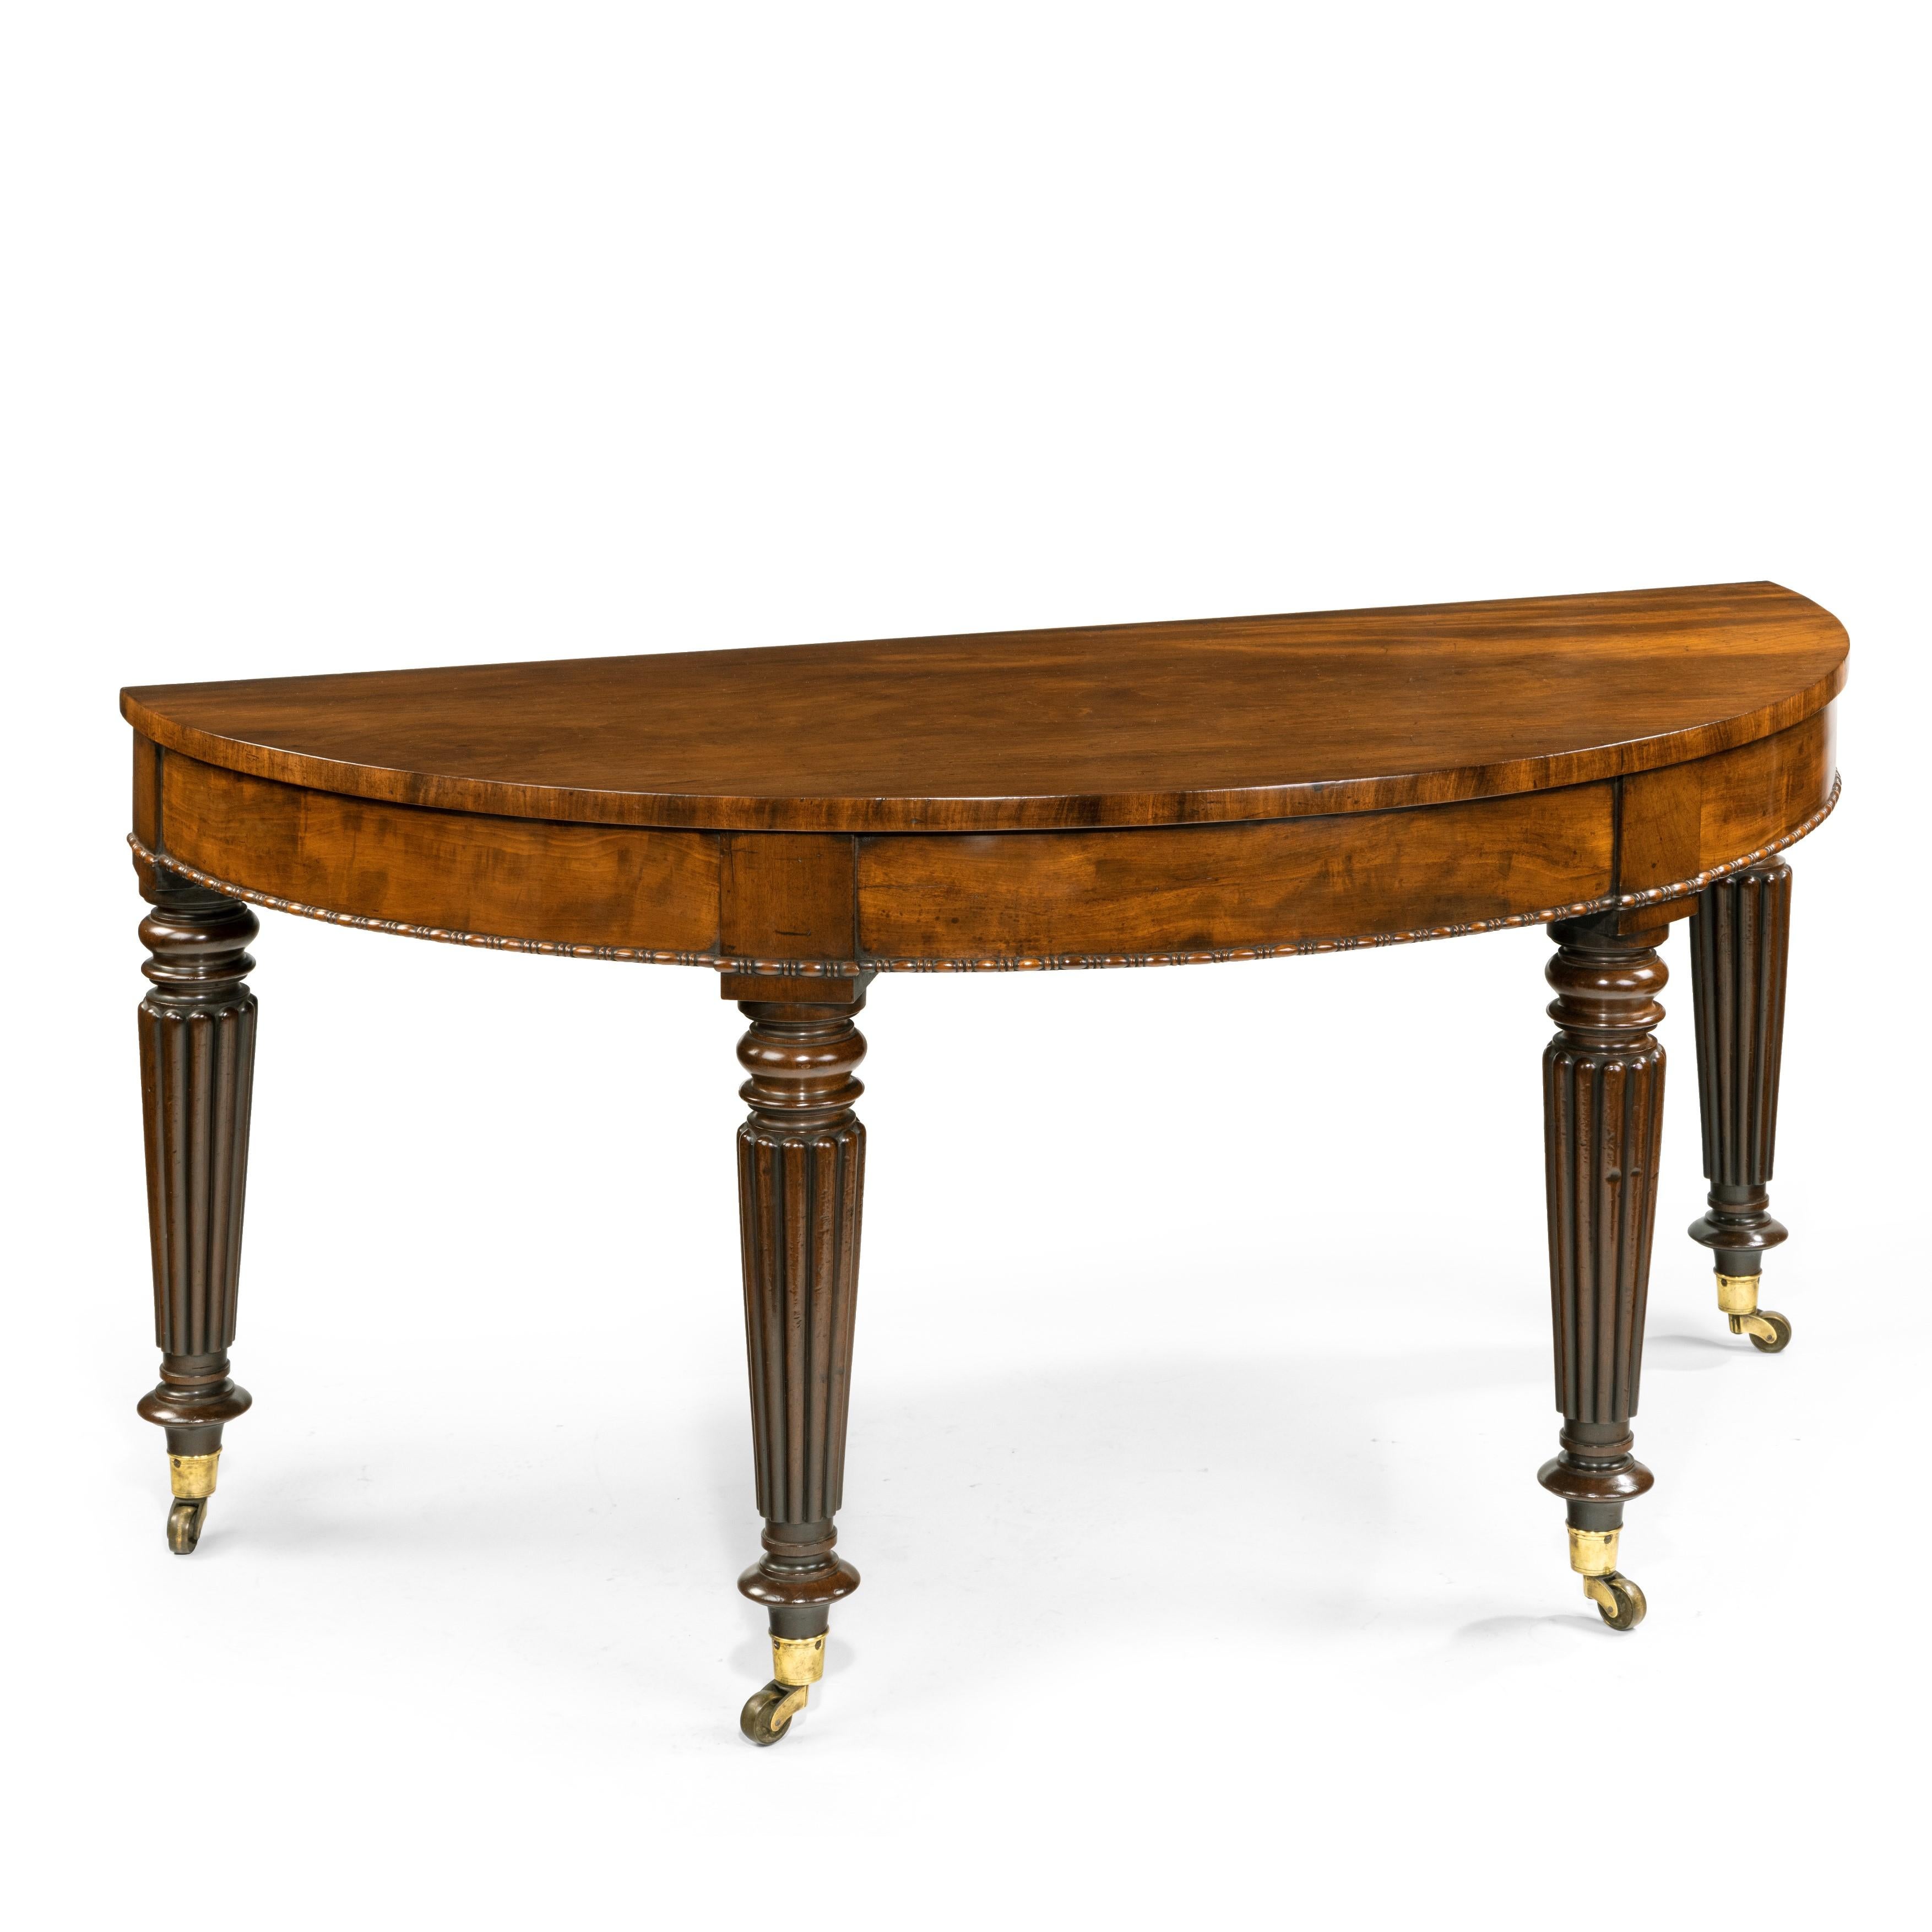 Mid-19th Century Early Victorian Mahogany Console Tables Attributed to Gillows